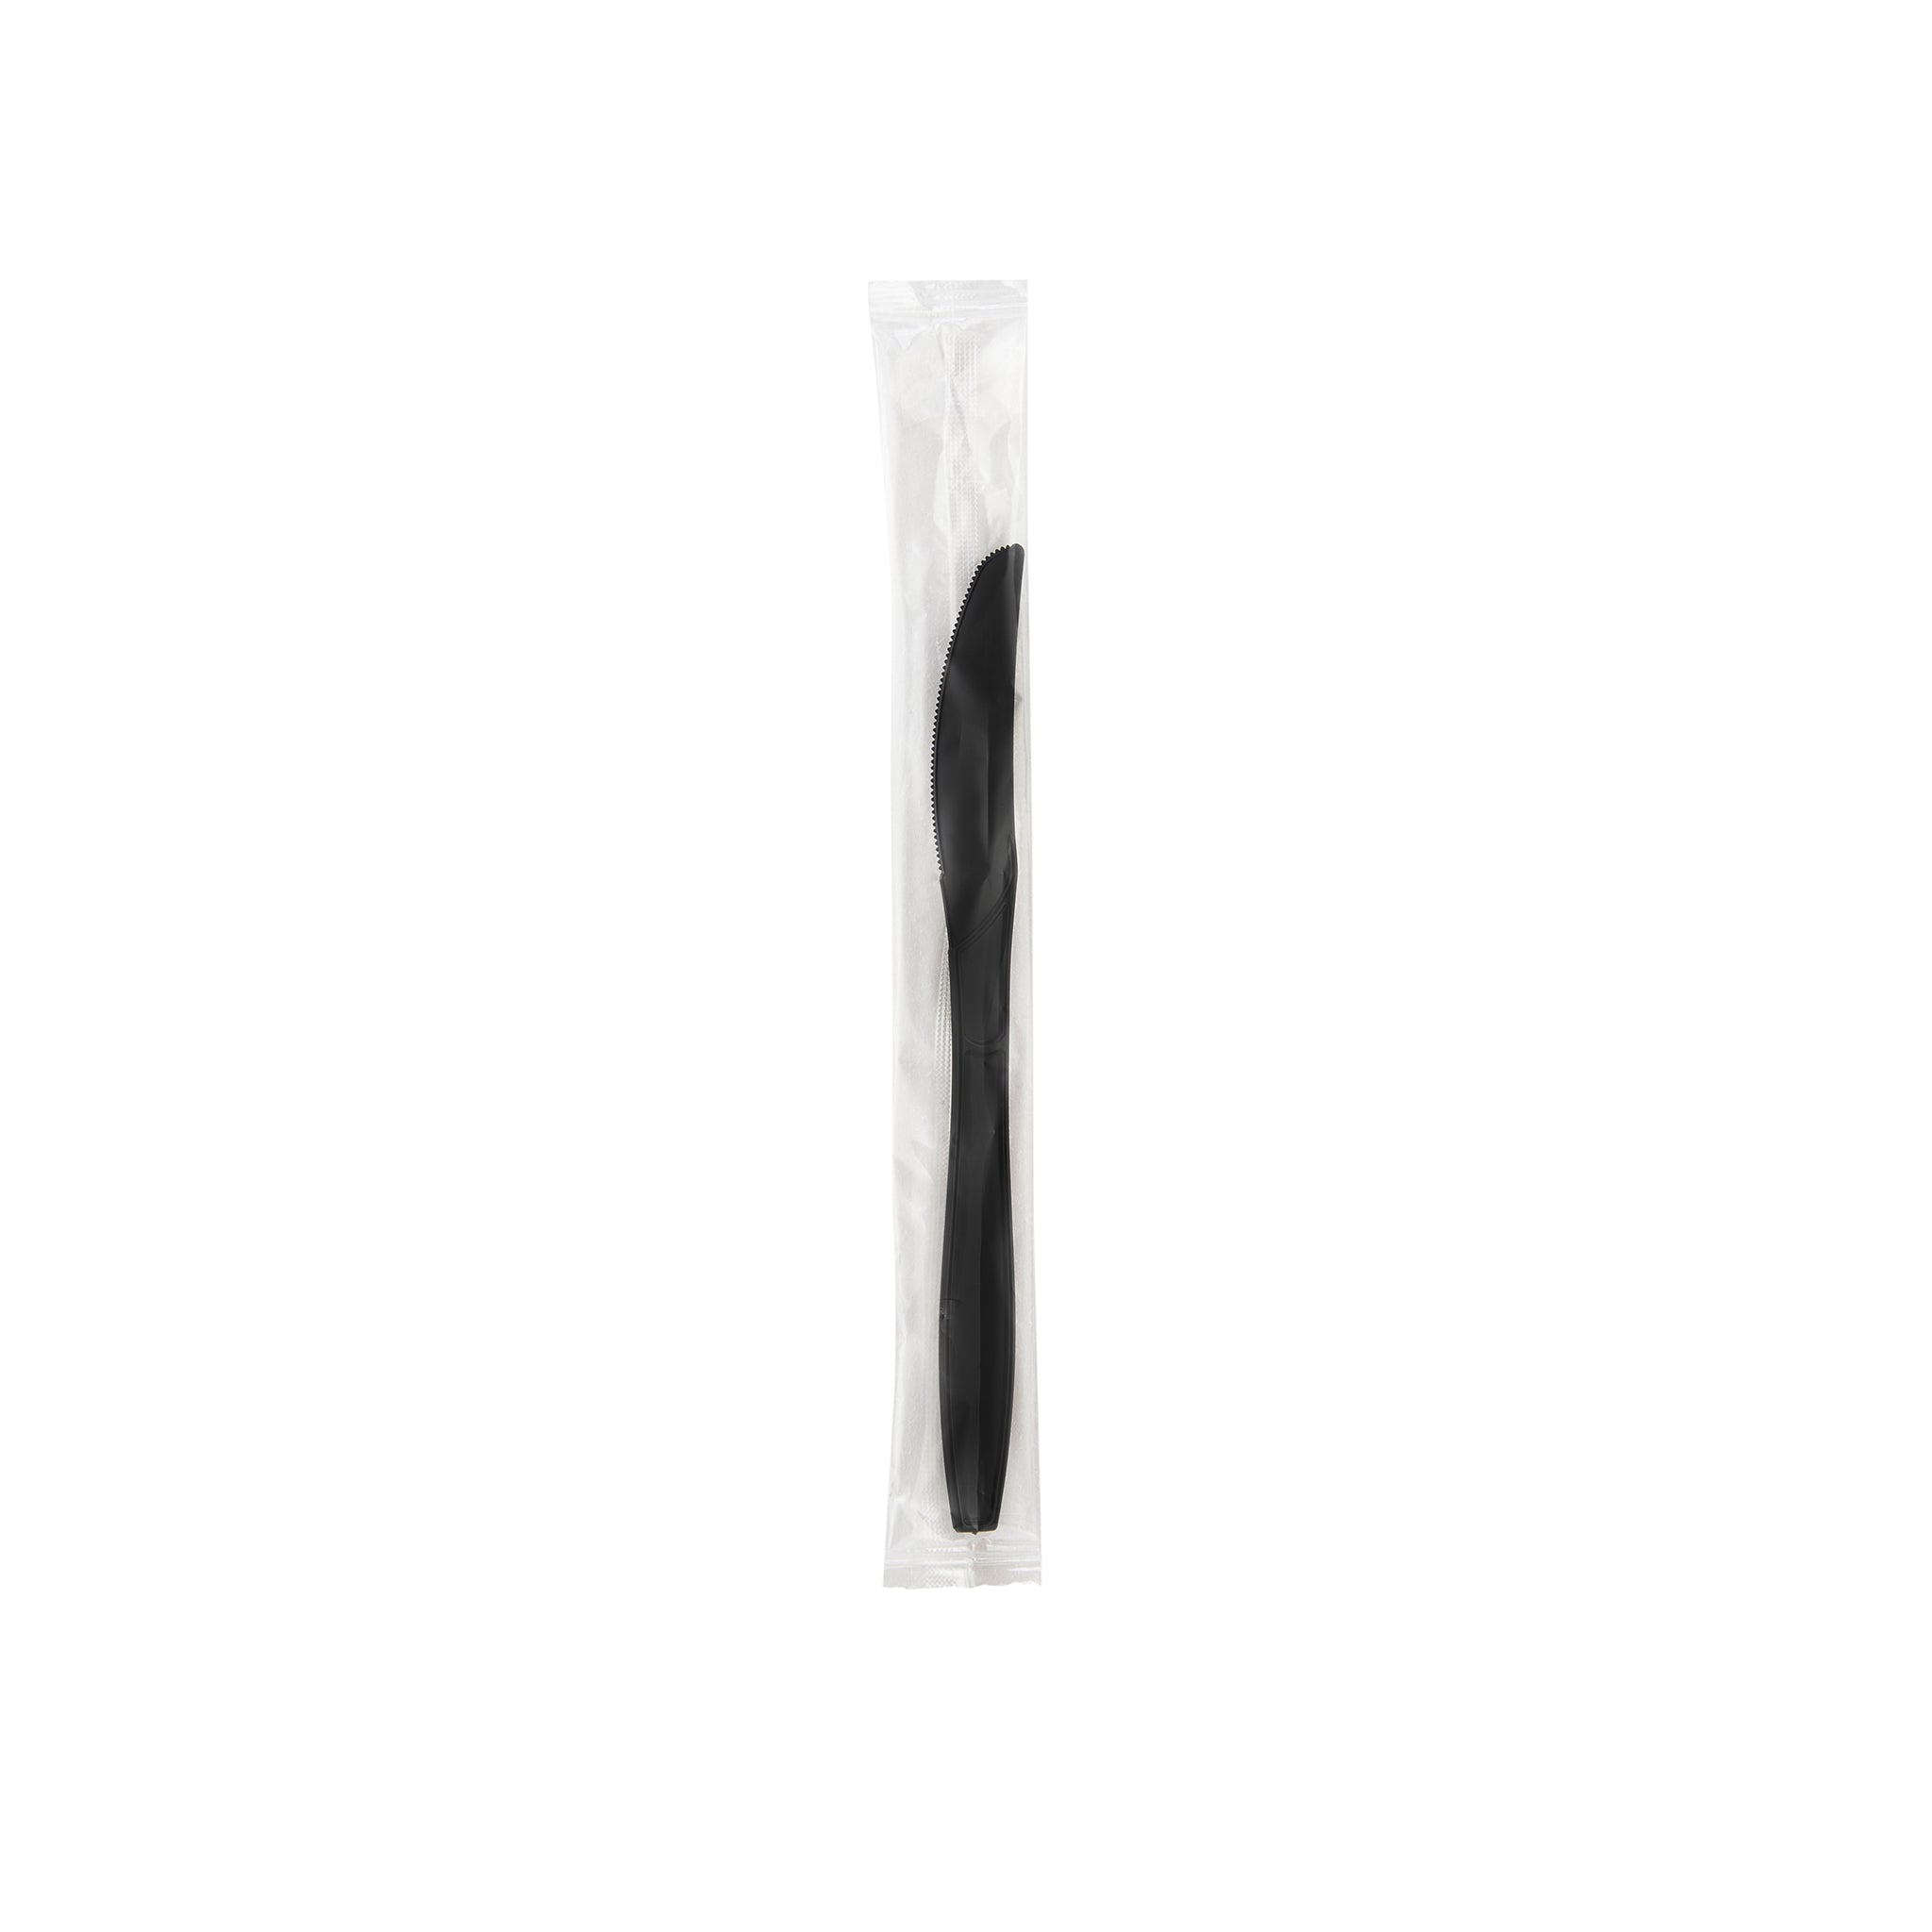 Heavy Duty Knife Black Plastic Individually Wrap 500 Pieces - Hotpack Global